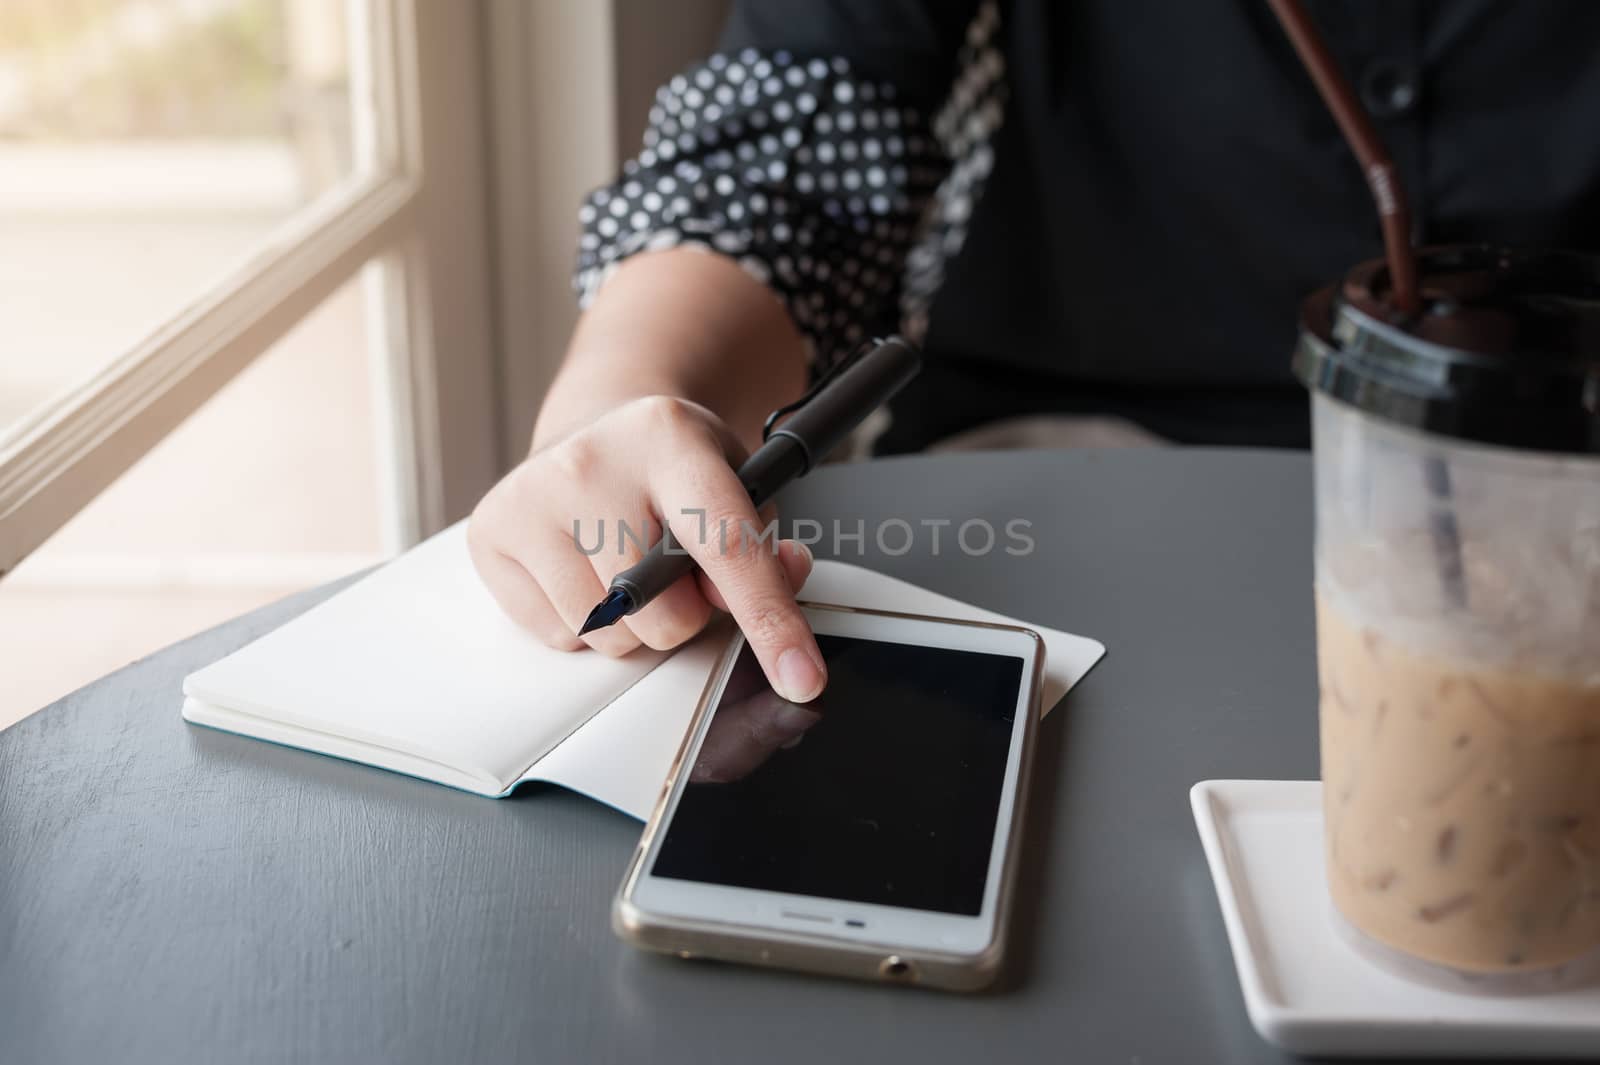 Woman hand touching on smartphone screen while writing something in coffee shop. Working from anywhere concept